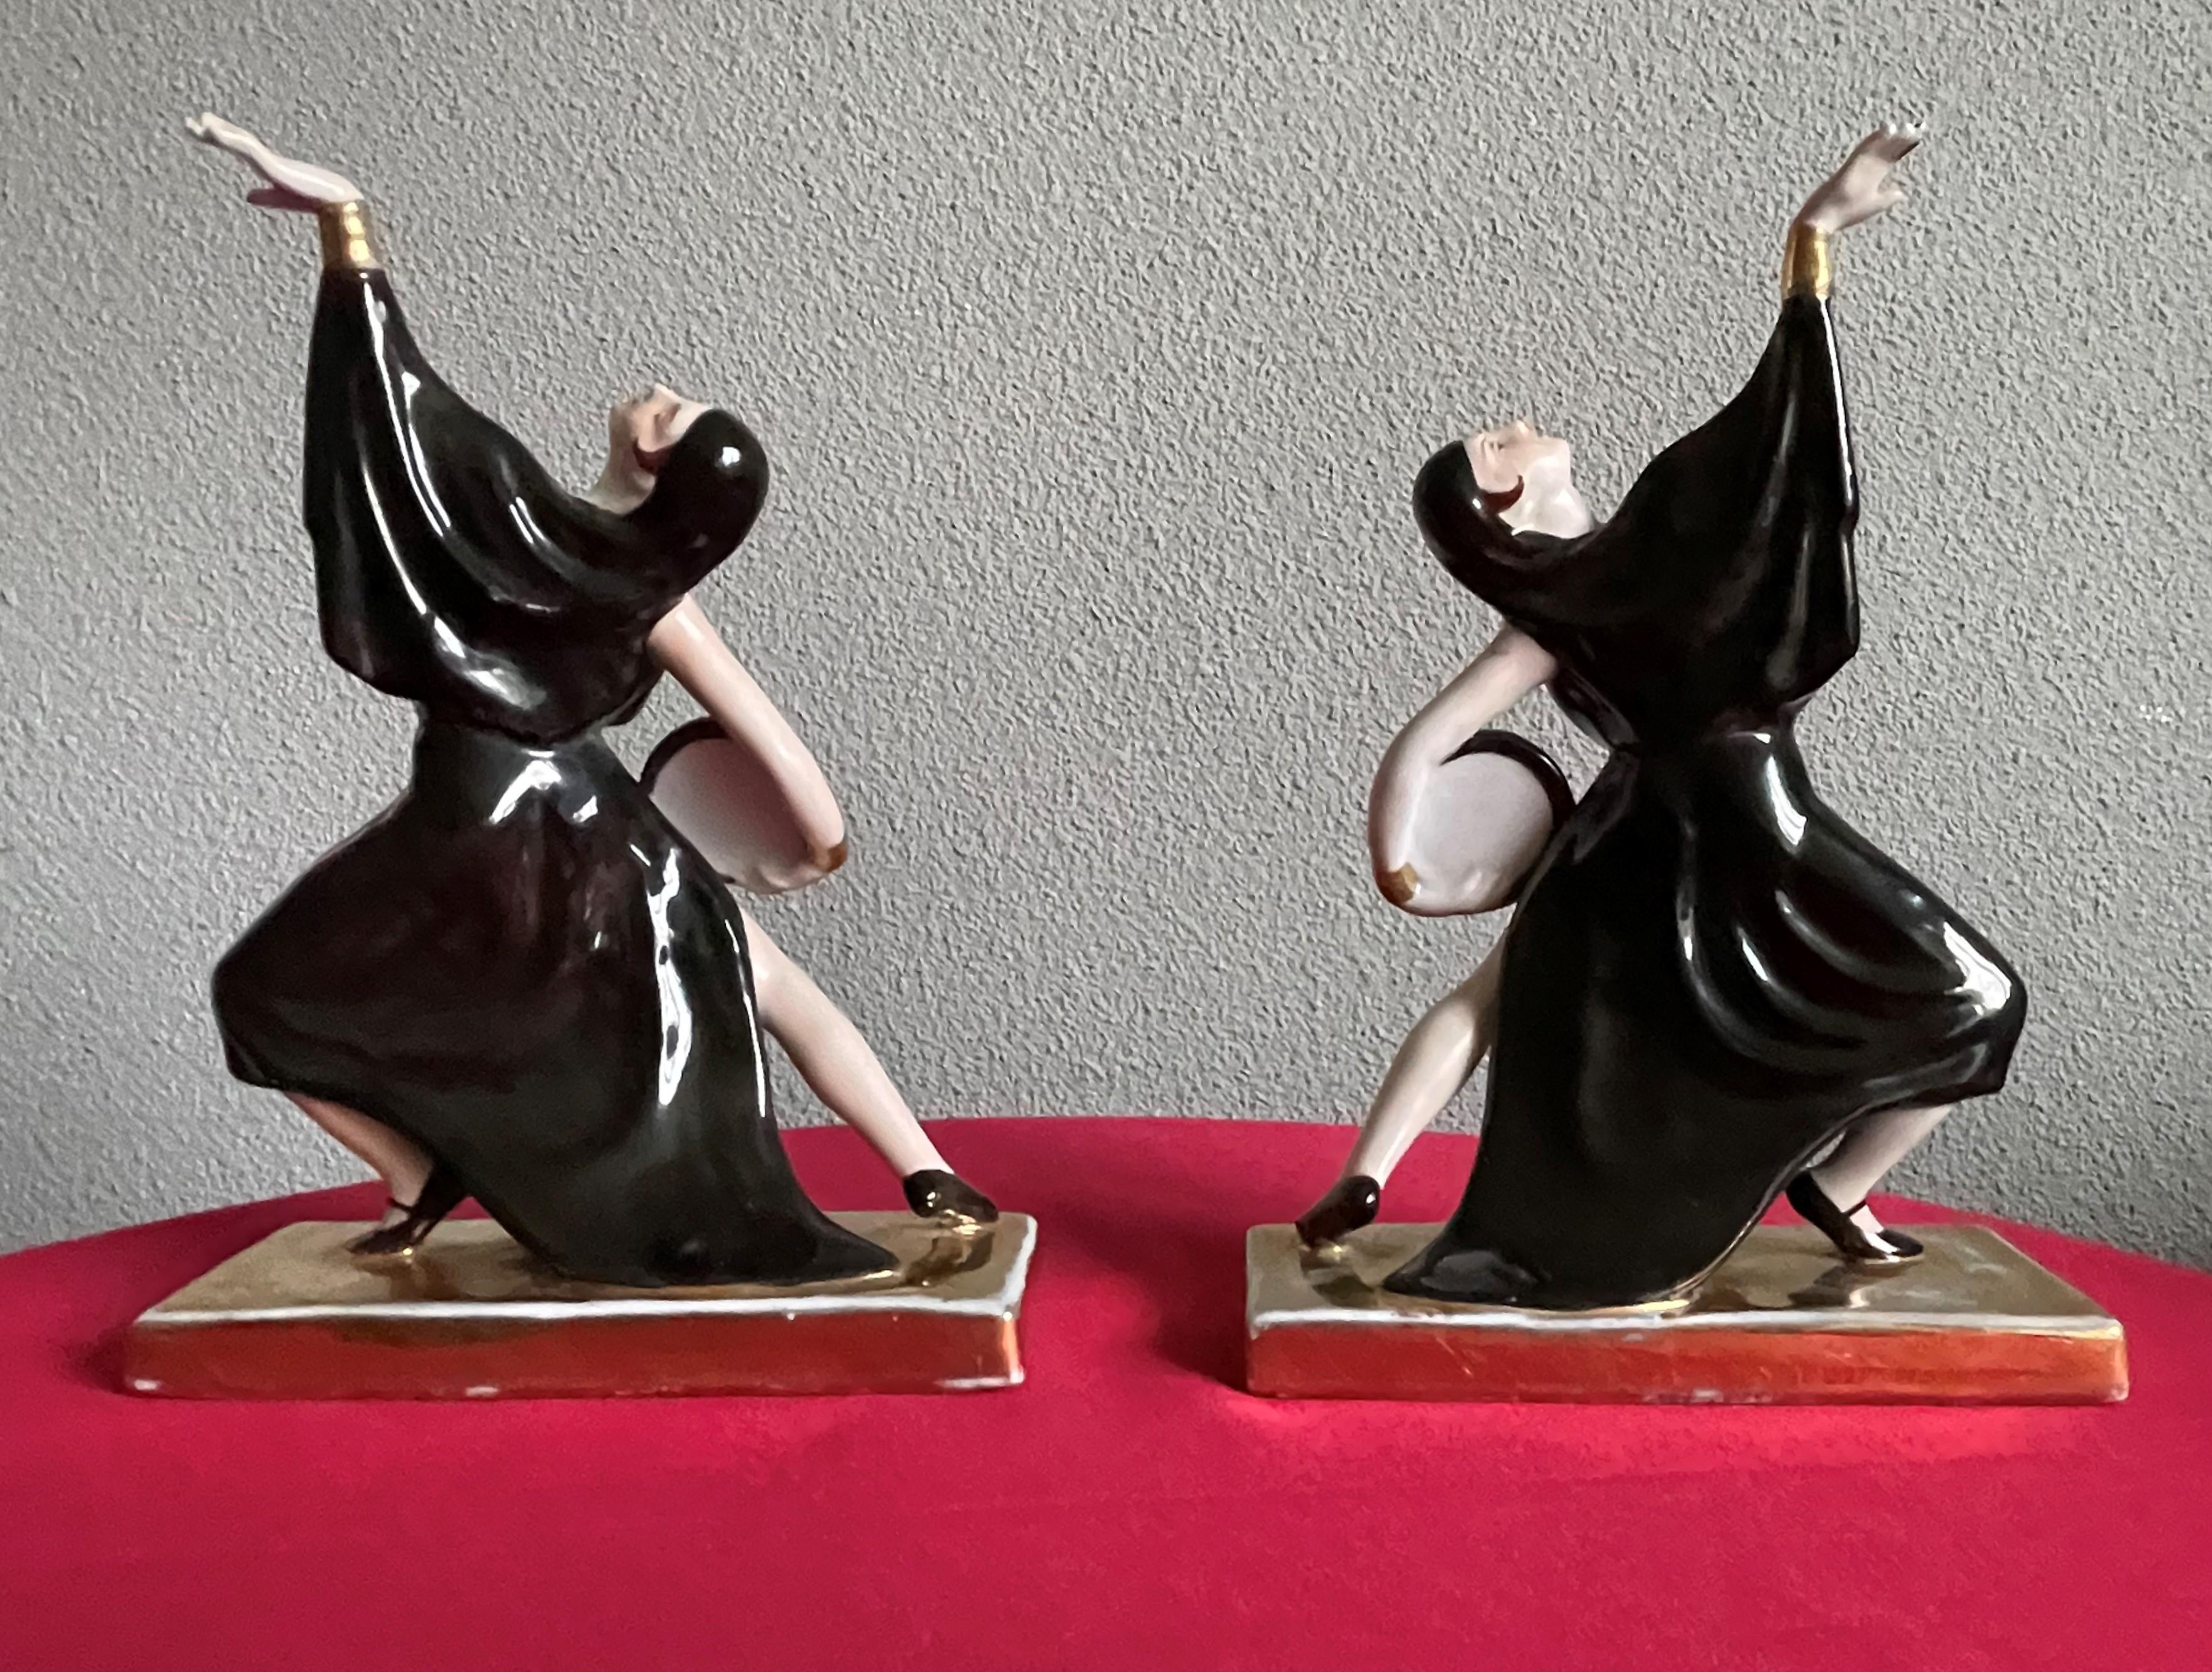 Rare & Stylish Pair of 1920s Porcelain French Art Deco Risque Dancer Bookends For Sale 6